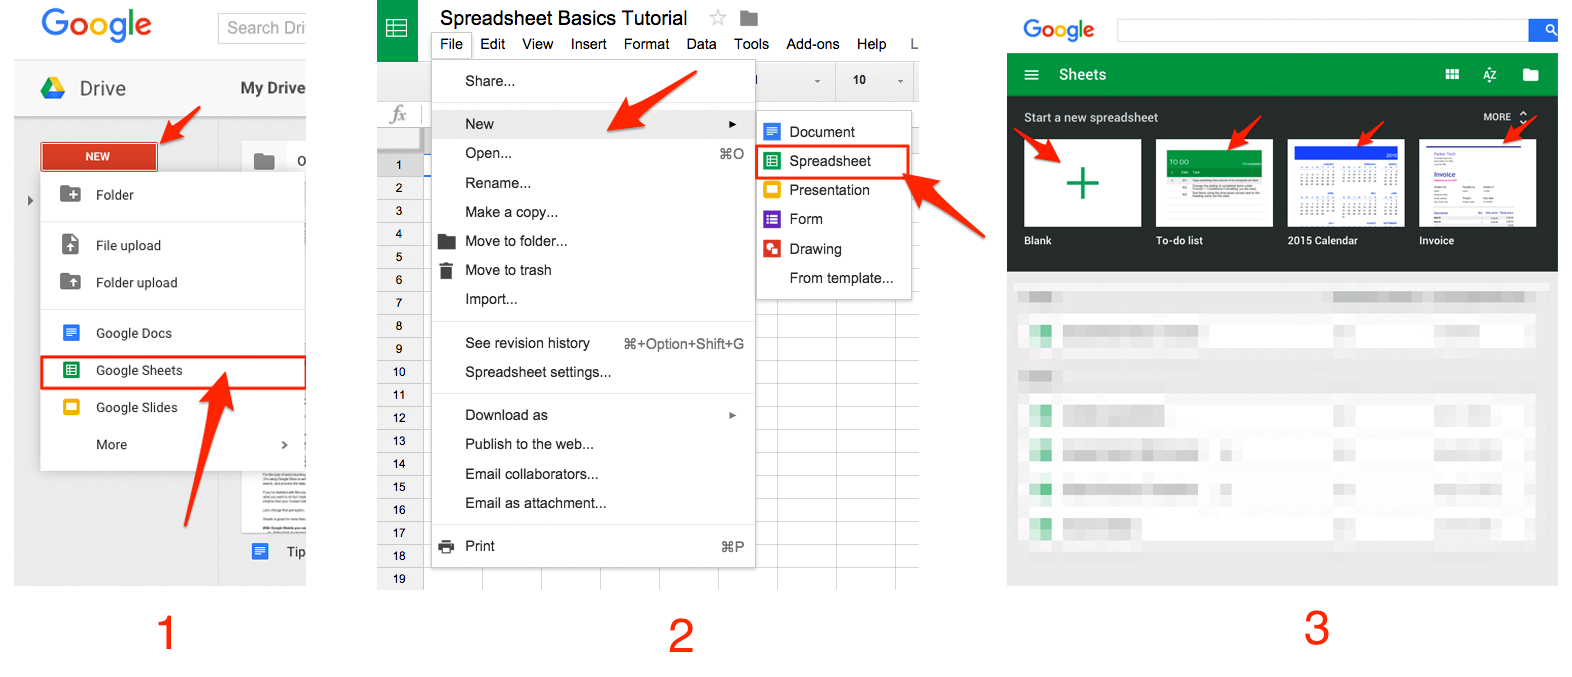 Create Excel Spreadsheet With Google Sheets 101: The Beginner's Guide To Online Spreadsheets  The